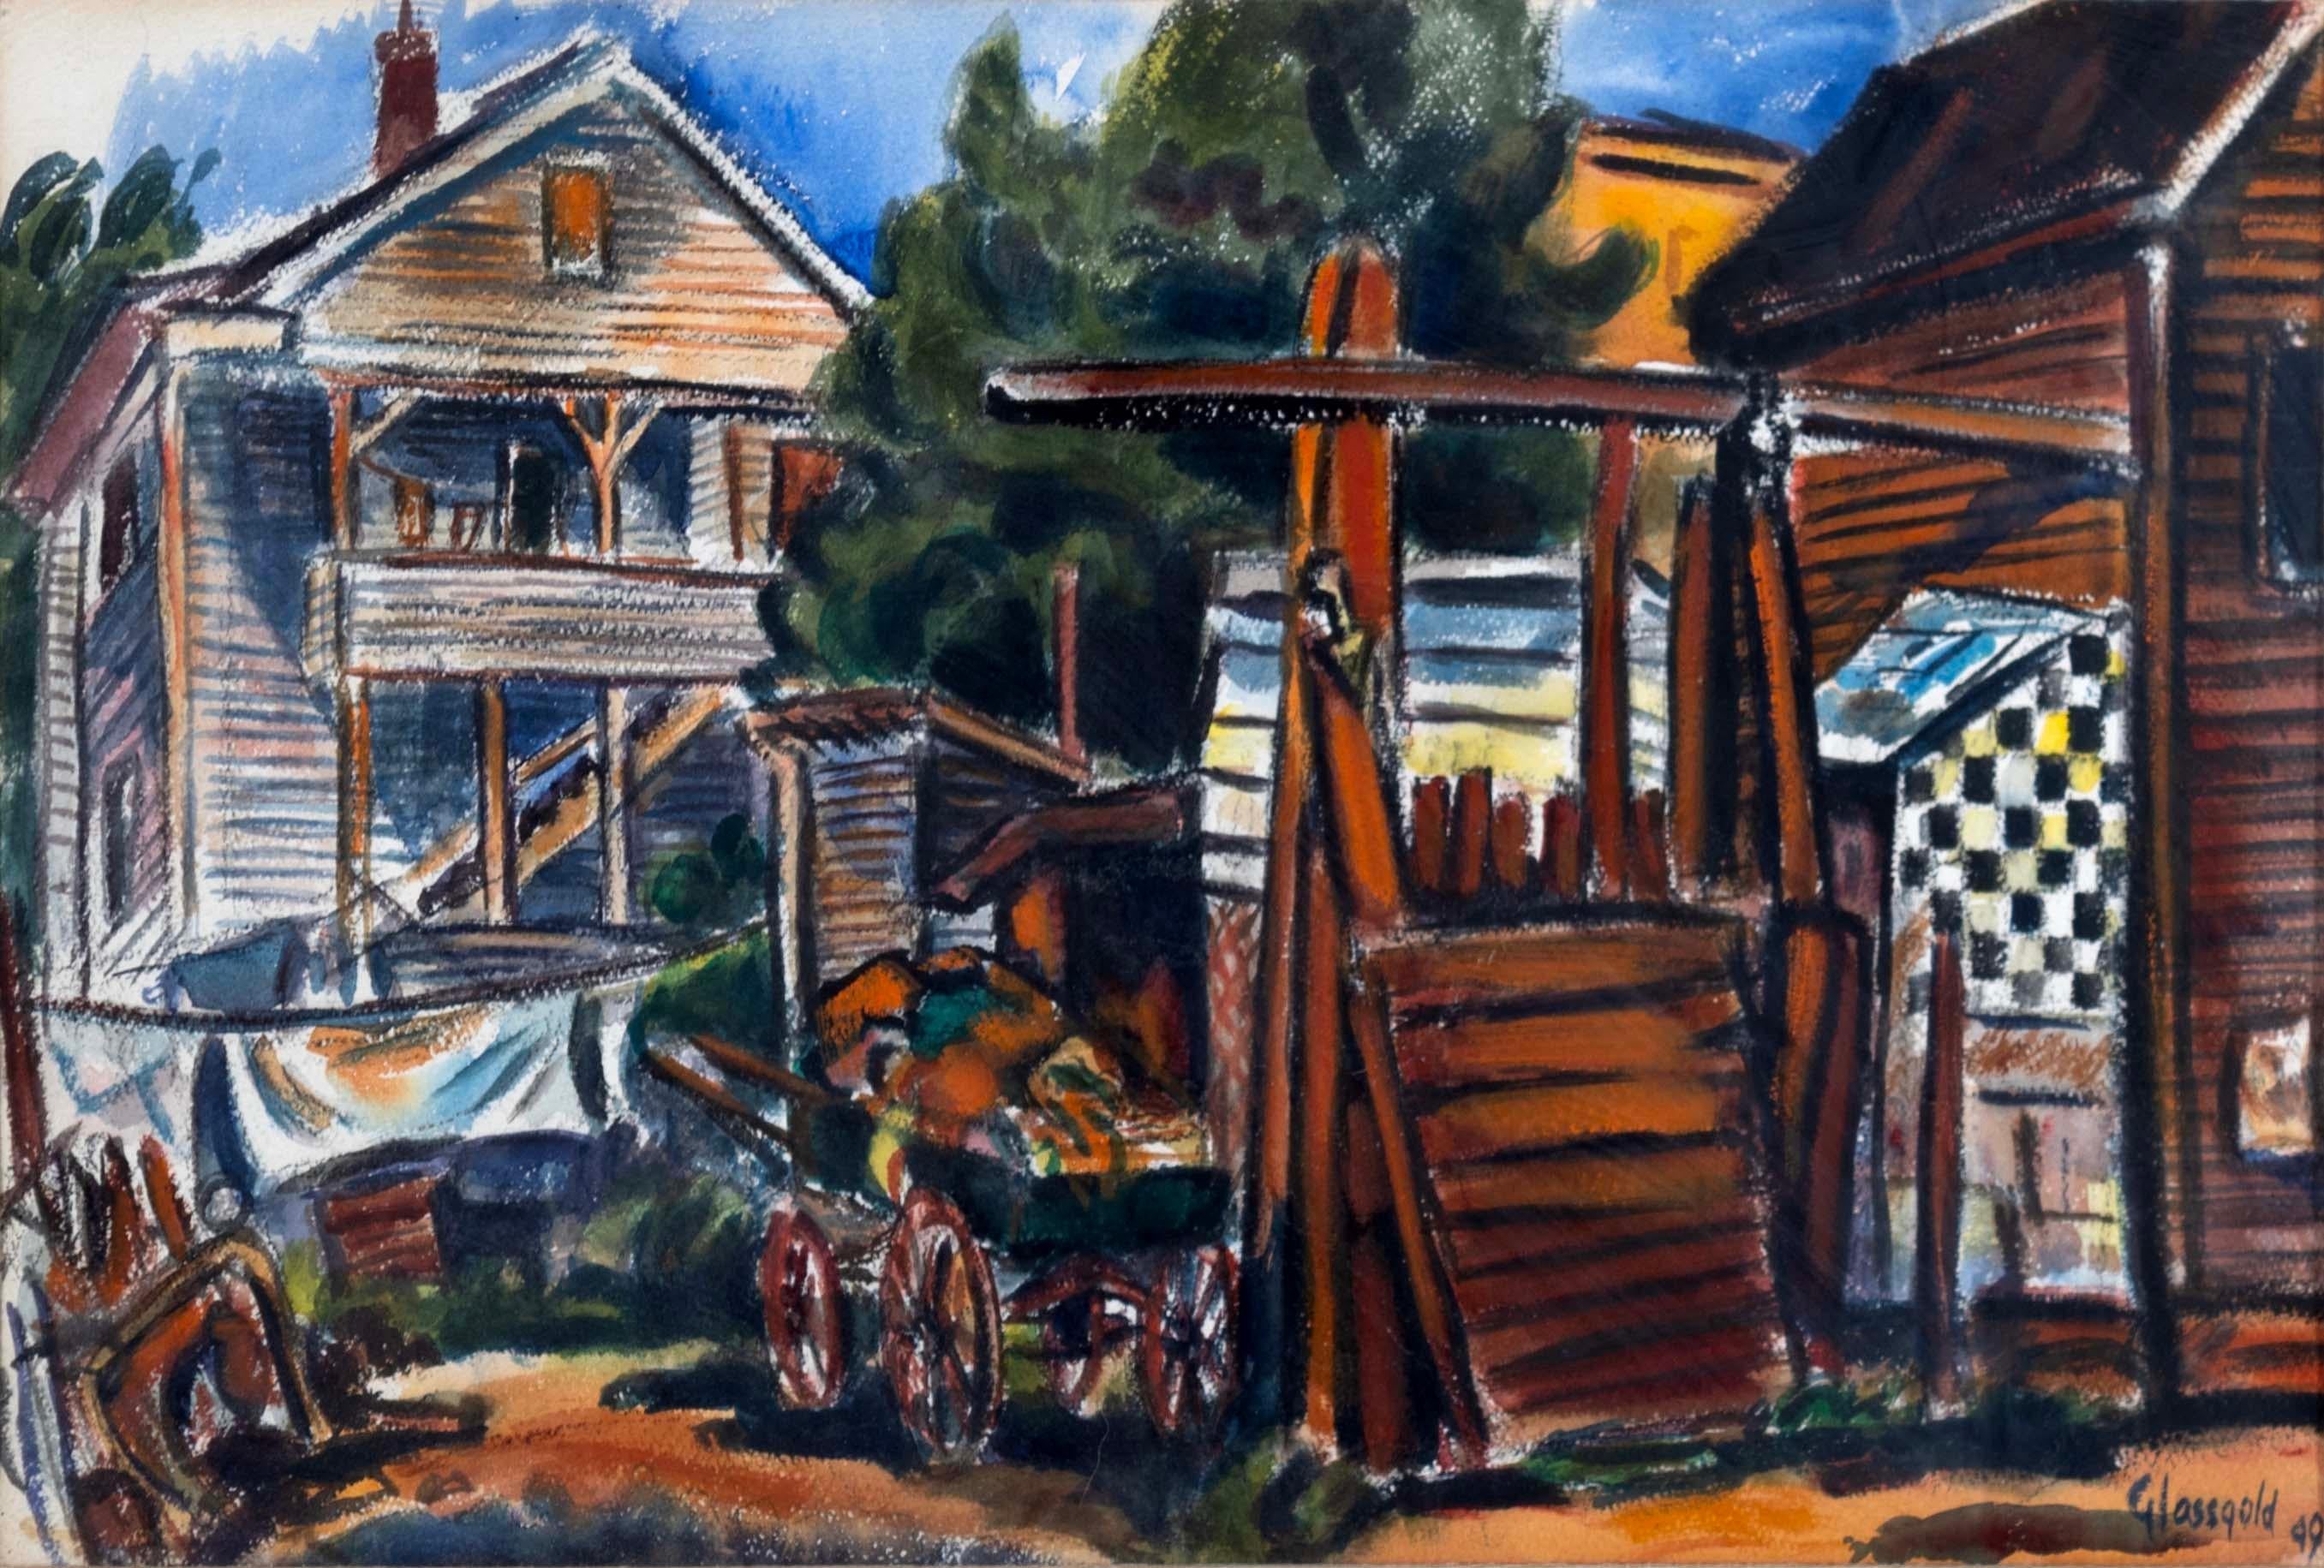 An energetic and bright watercolor on paper showcasing an example of modern American Impressionism by Harry Glassgold. Signed bottom right and dated 1949. The subject appears to be a rural town and the dwellings found within. The bright colors are